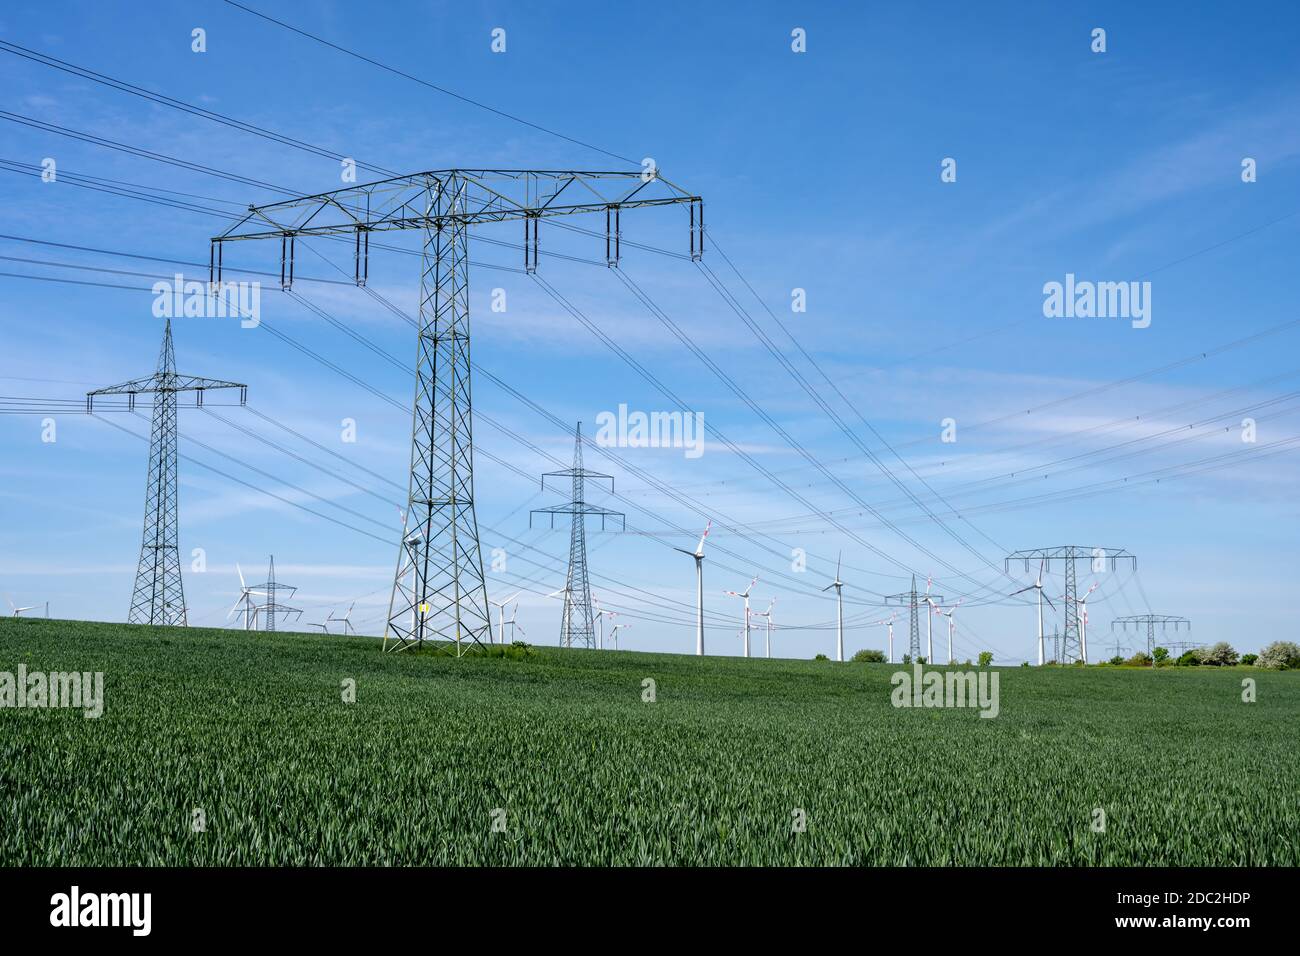 Power lines with wind turbines in the back seen in Germany Stock Photo